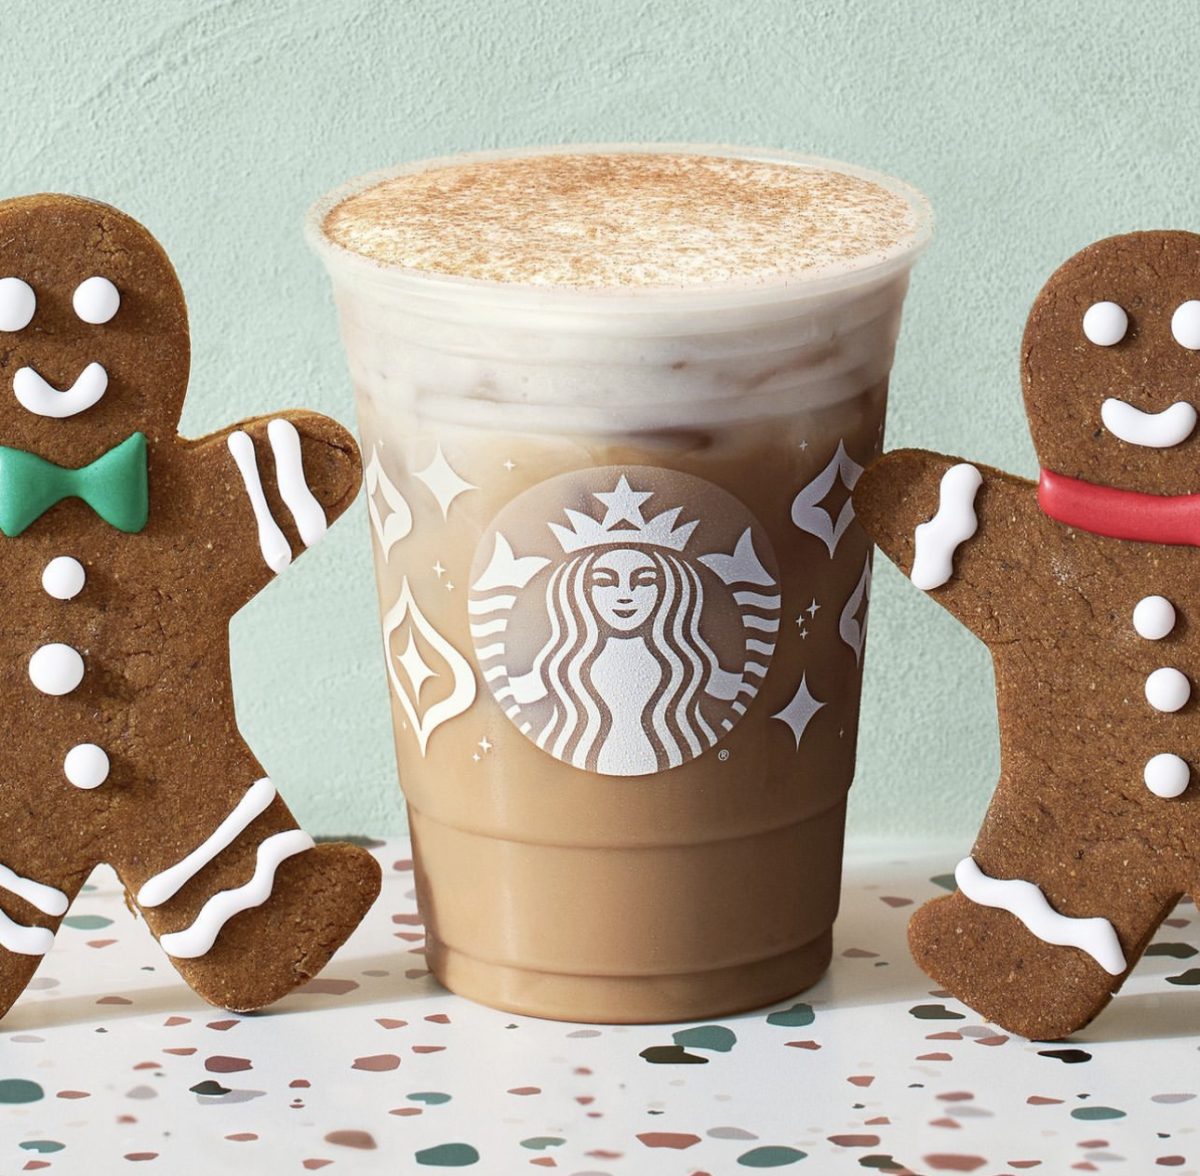 The newest drink on the menu, the Gingerbread Oatmilk Chai, is popular amongst Steinbrenner High School students. With hints of gingerbread and a blend of chai spices, this drink will give a holiday taste to all. Photo courtesy of Starbucks Instagram.